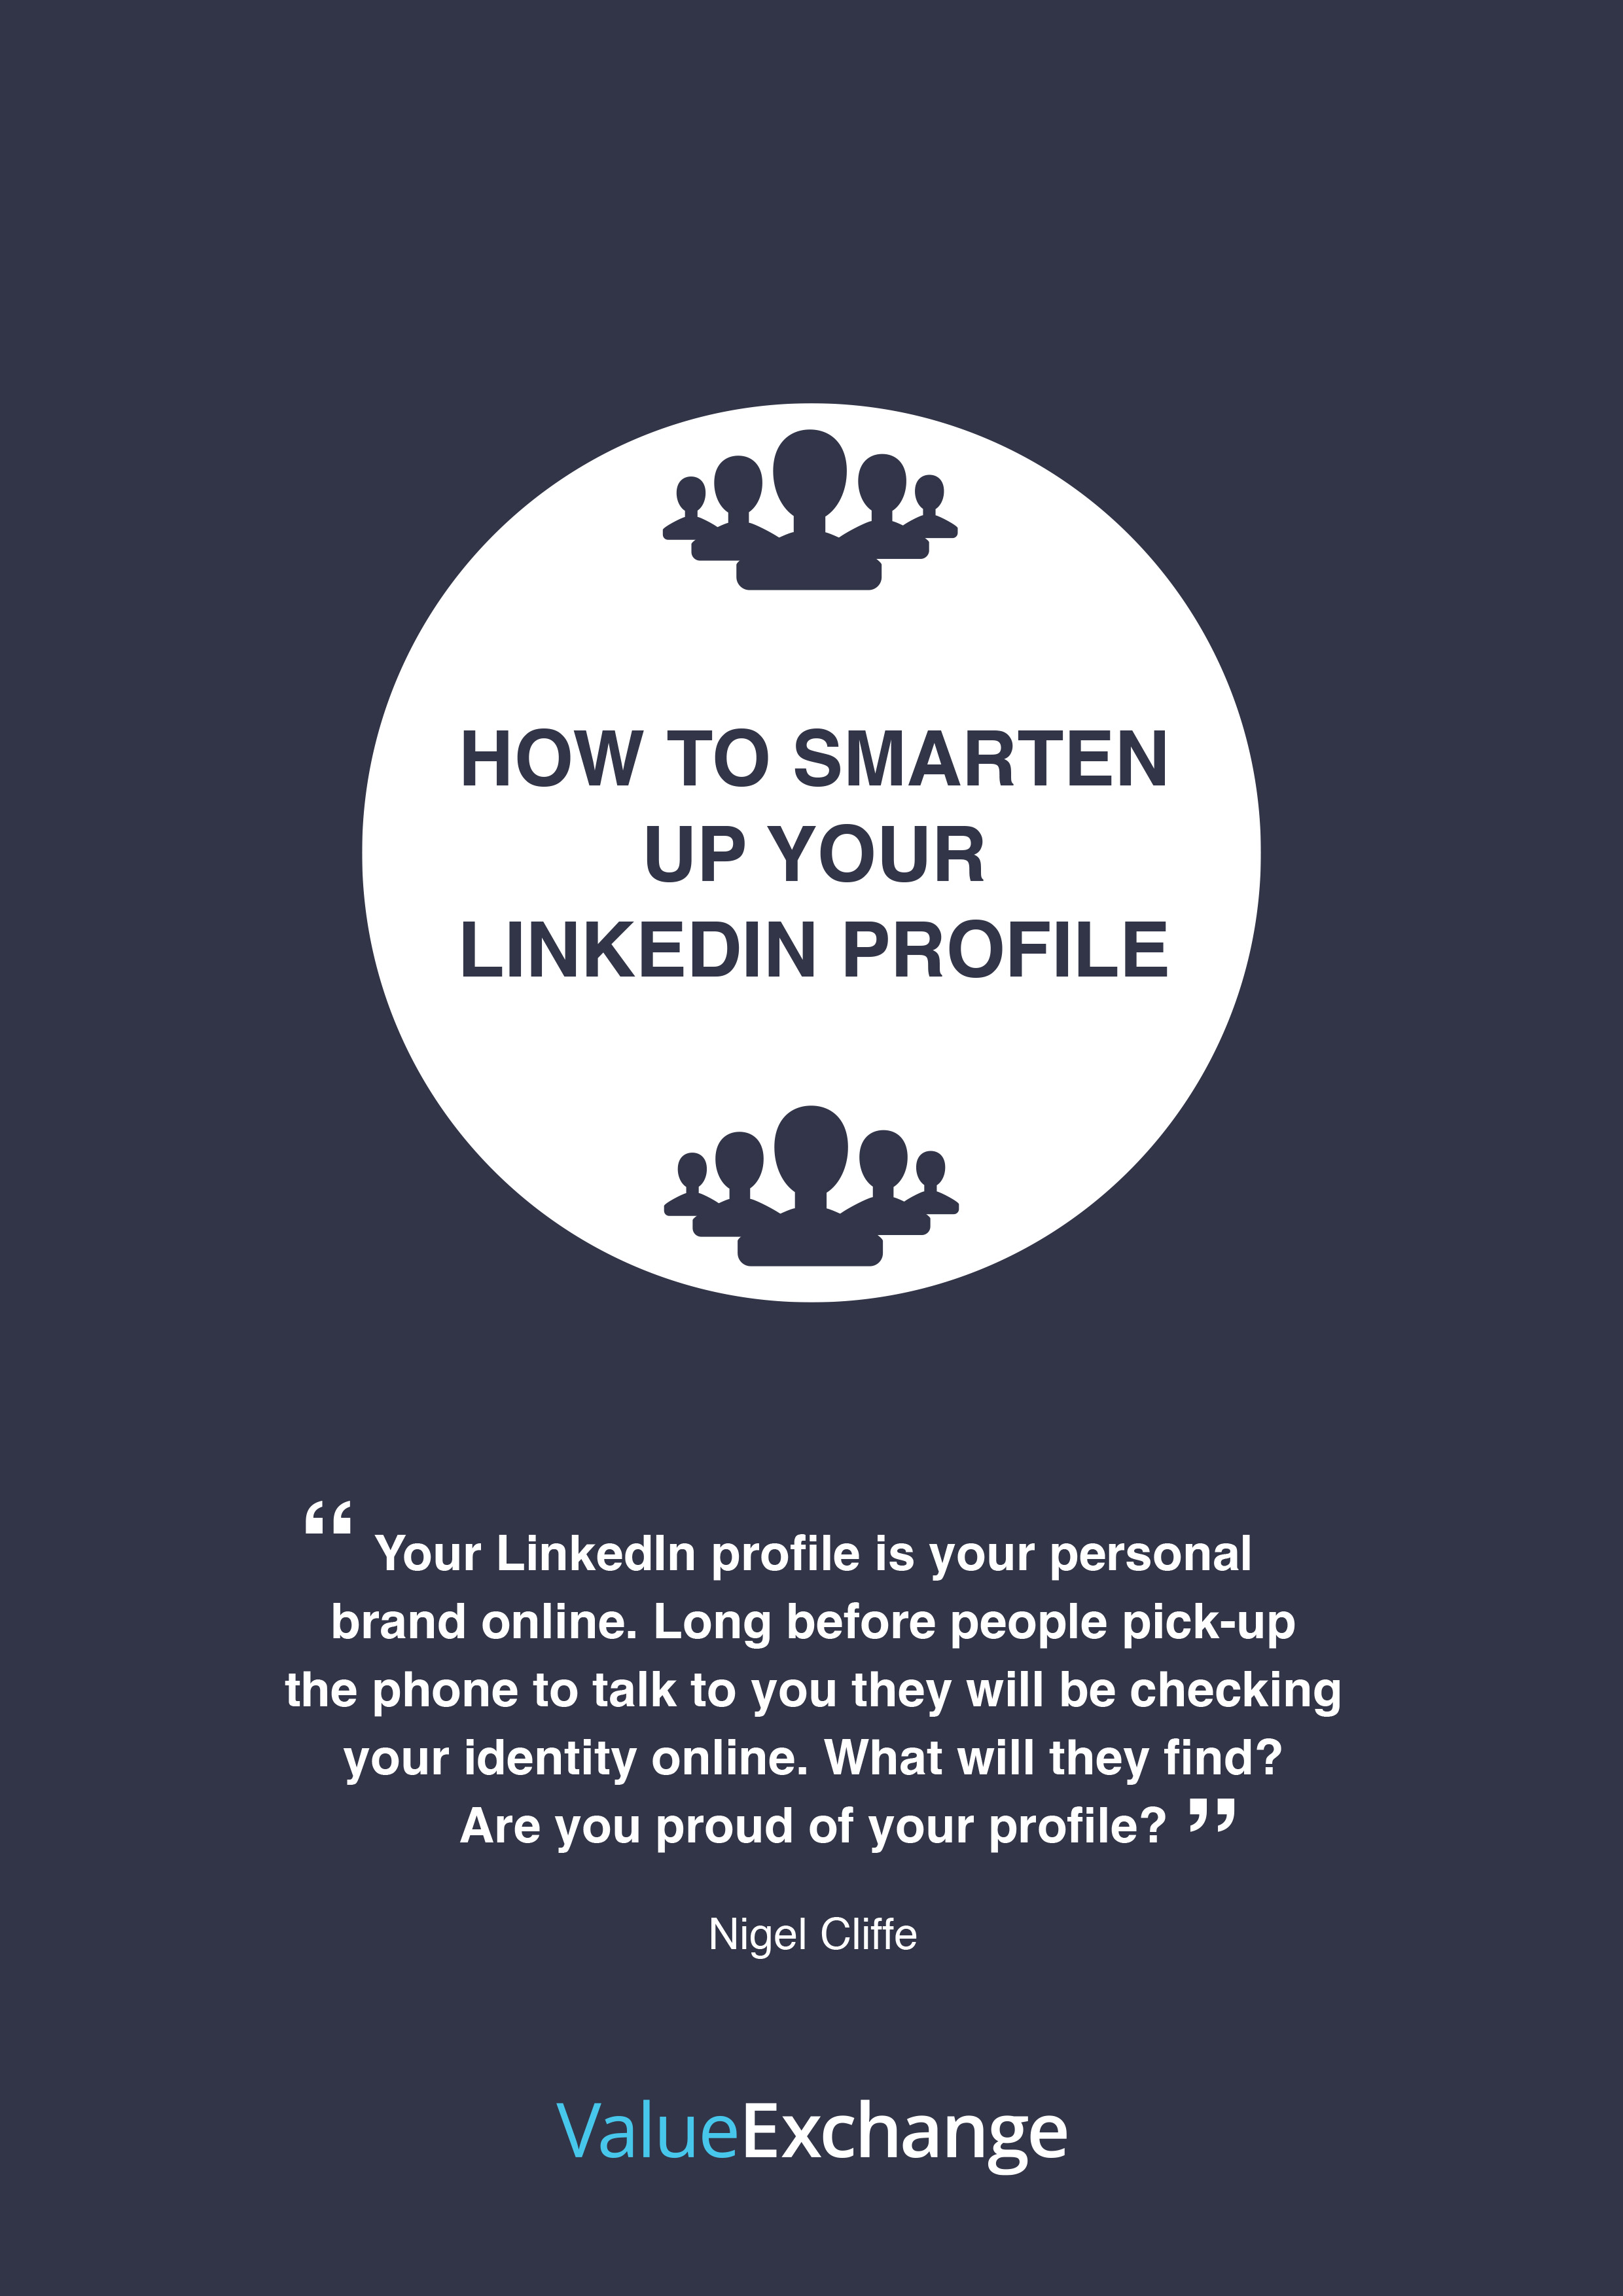 How to Smarten Up Your LinkedIn Profile LinkedIn resource by Nigel Cliffe